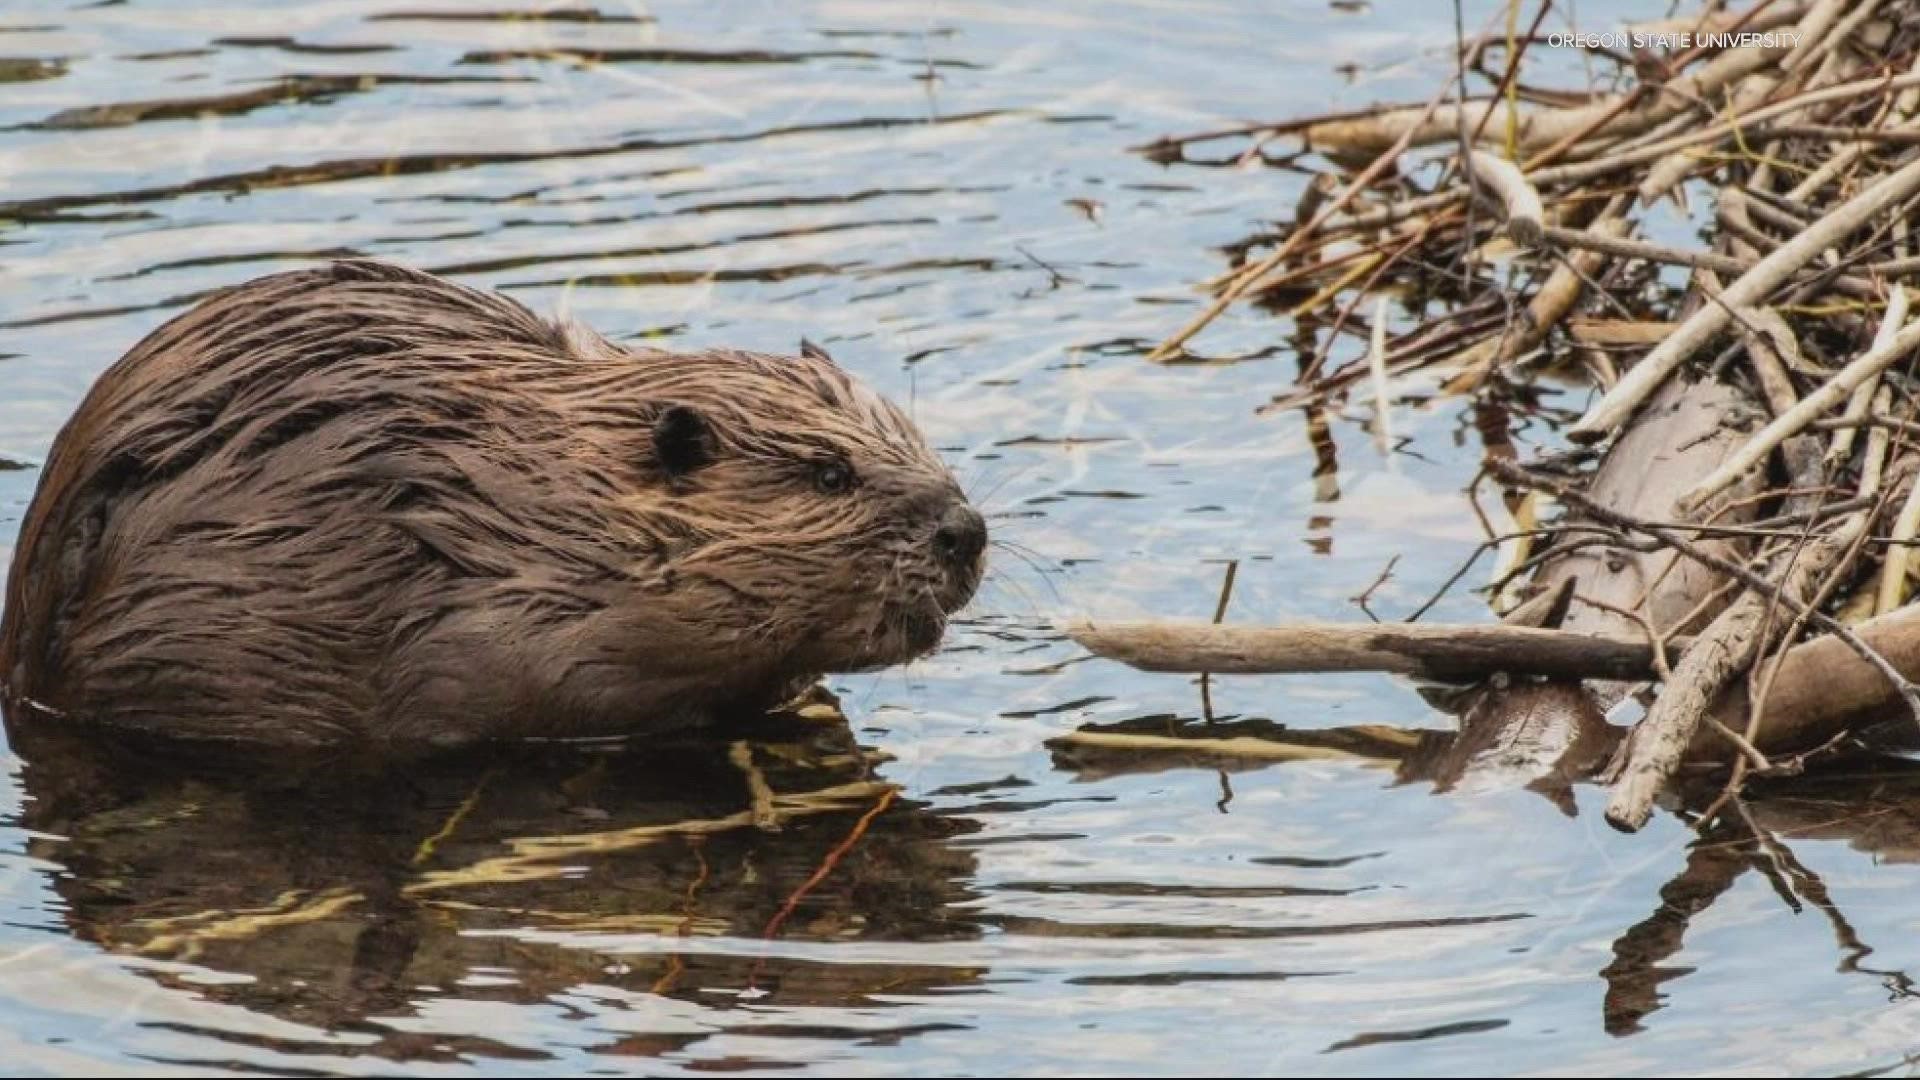 A team of researchers say they want to see more wolves and beavers on federal land because of their benefits for the ecosystem.